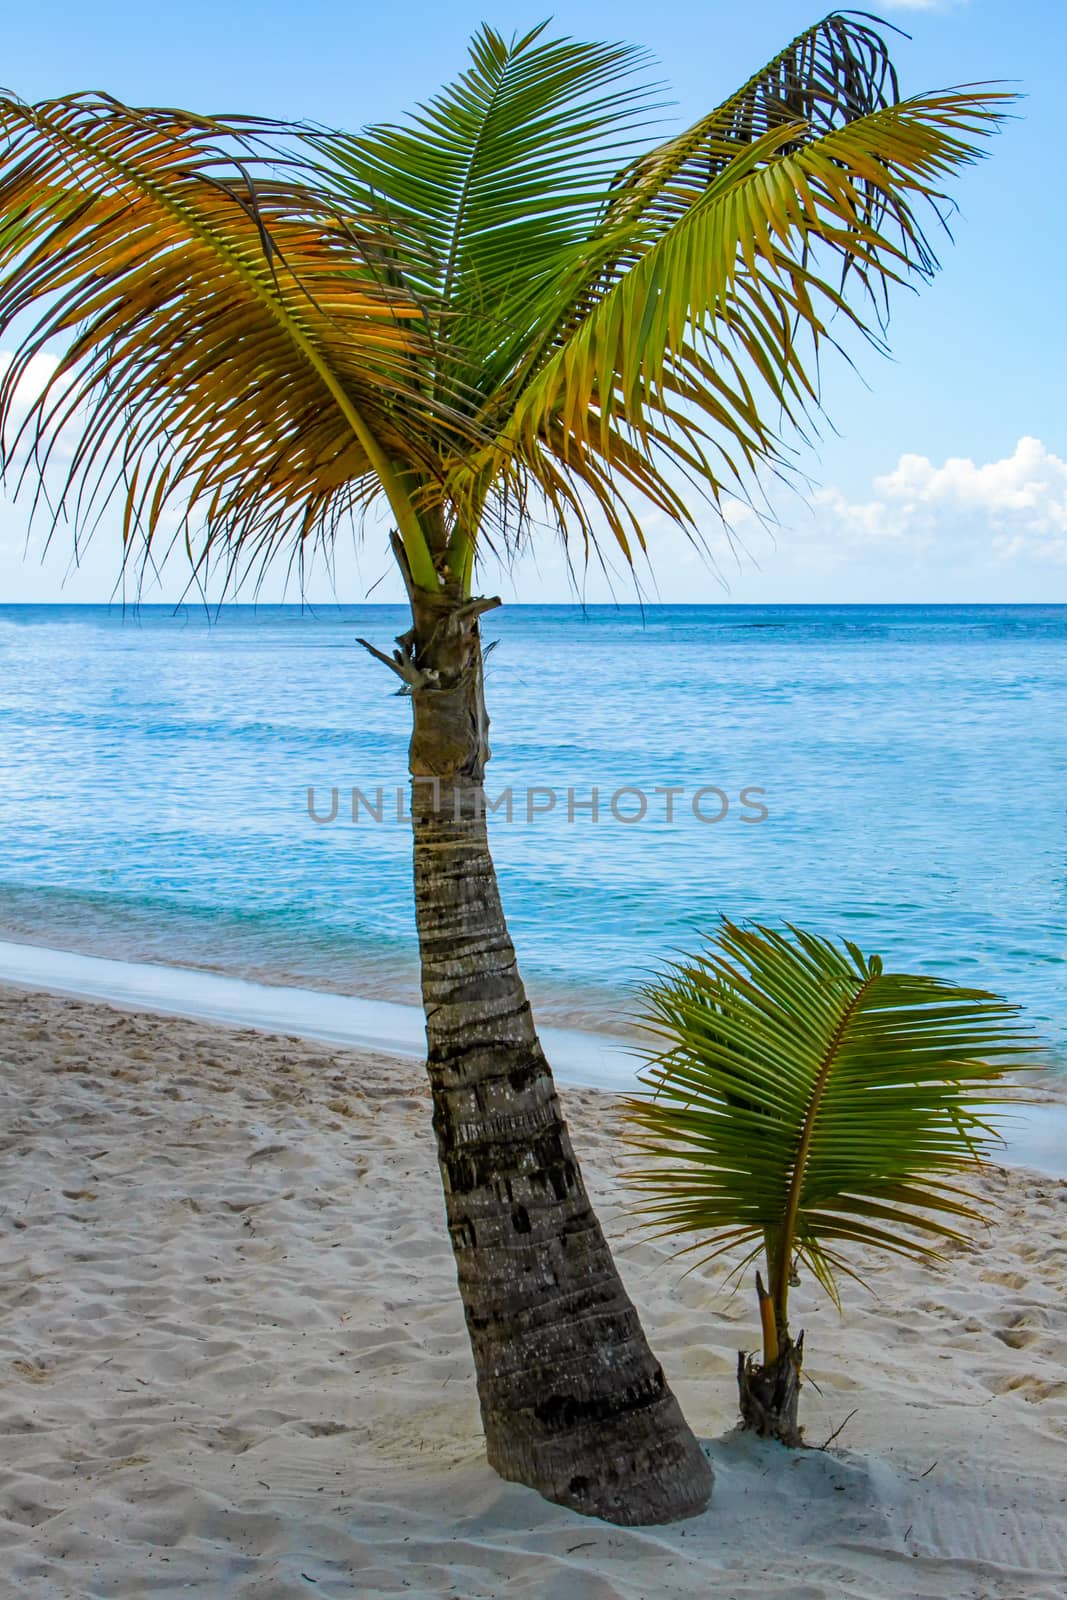 A beautiful view of two palm trees on a beach in Saona Island.